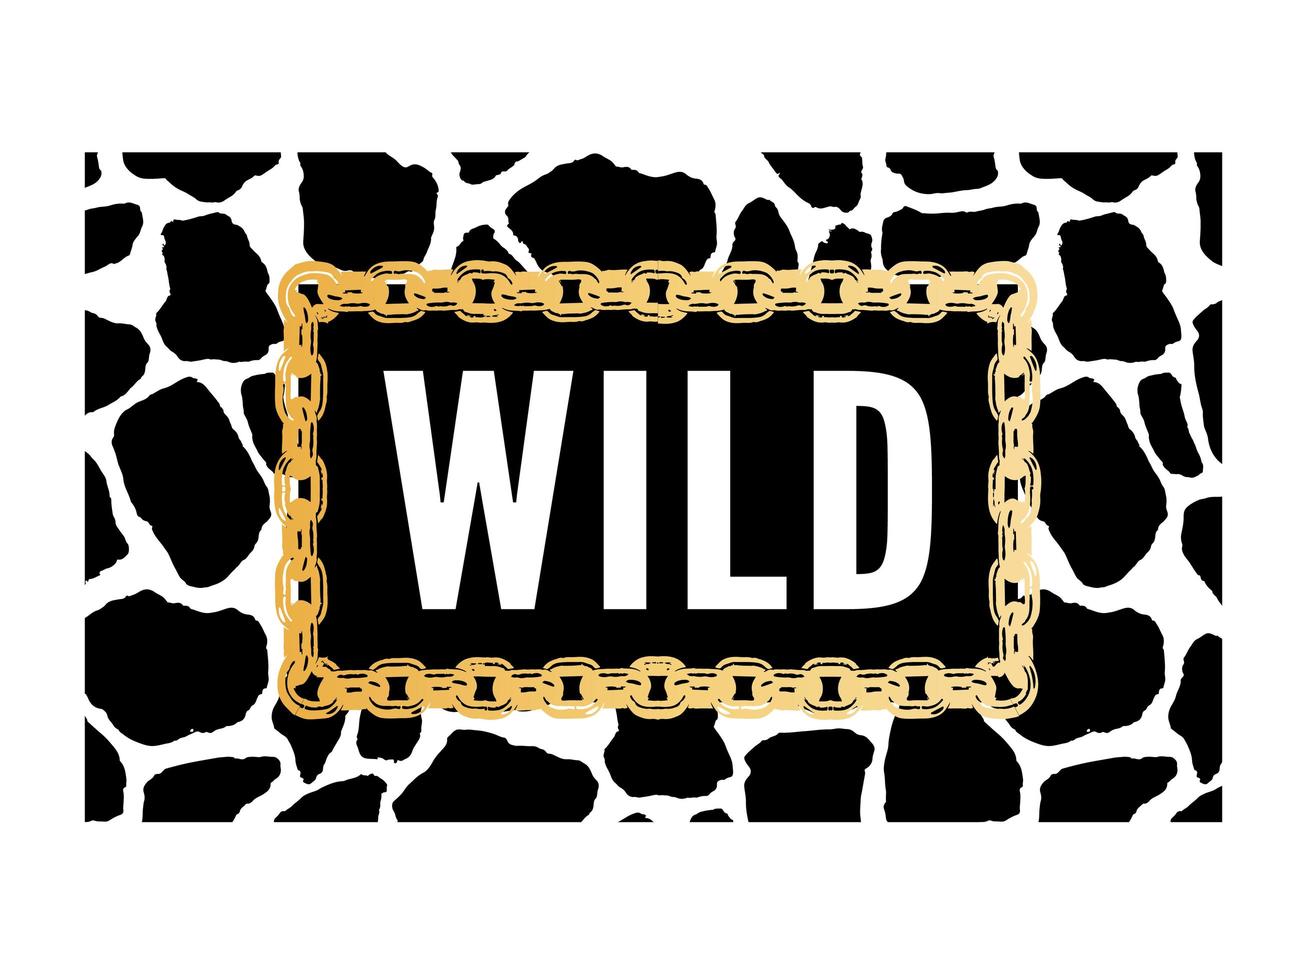 Decorative Wild Text with Giraffe Pattern, Fashion, Card and Poster Print slogan vector